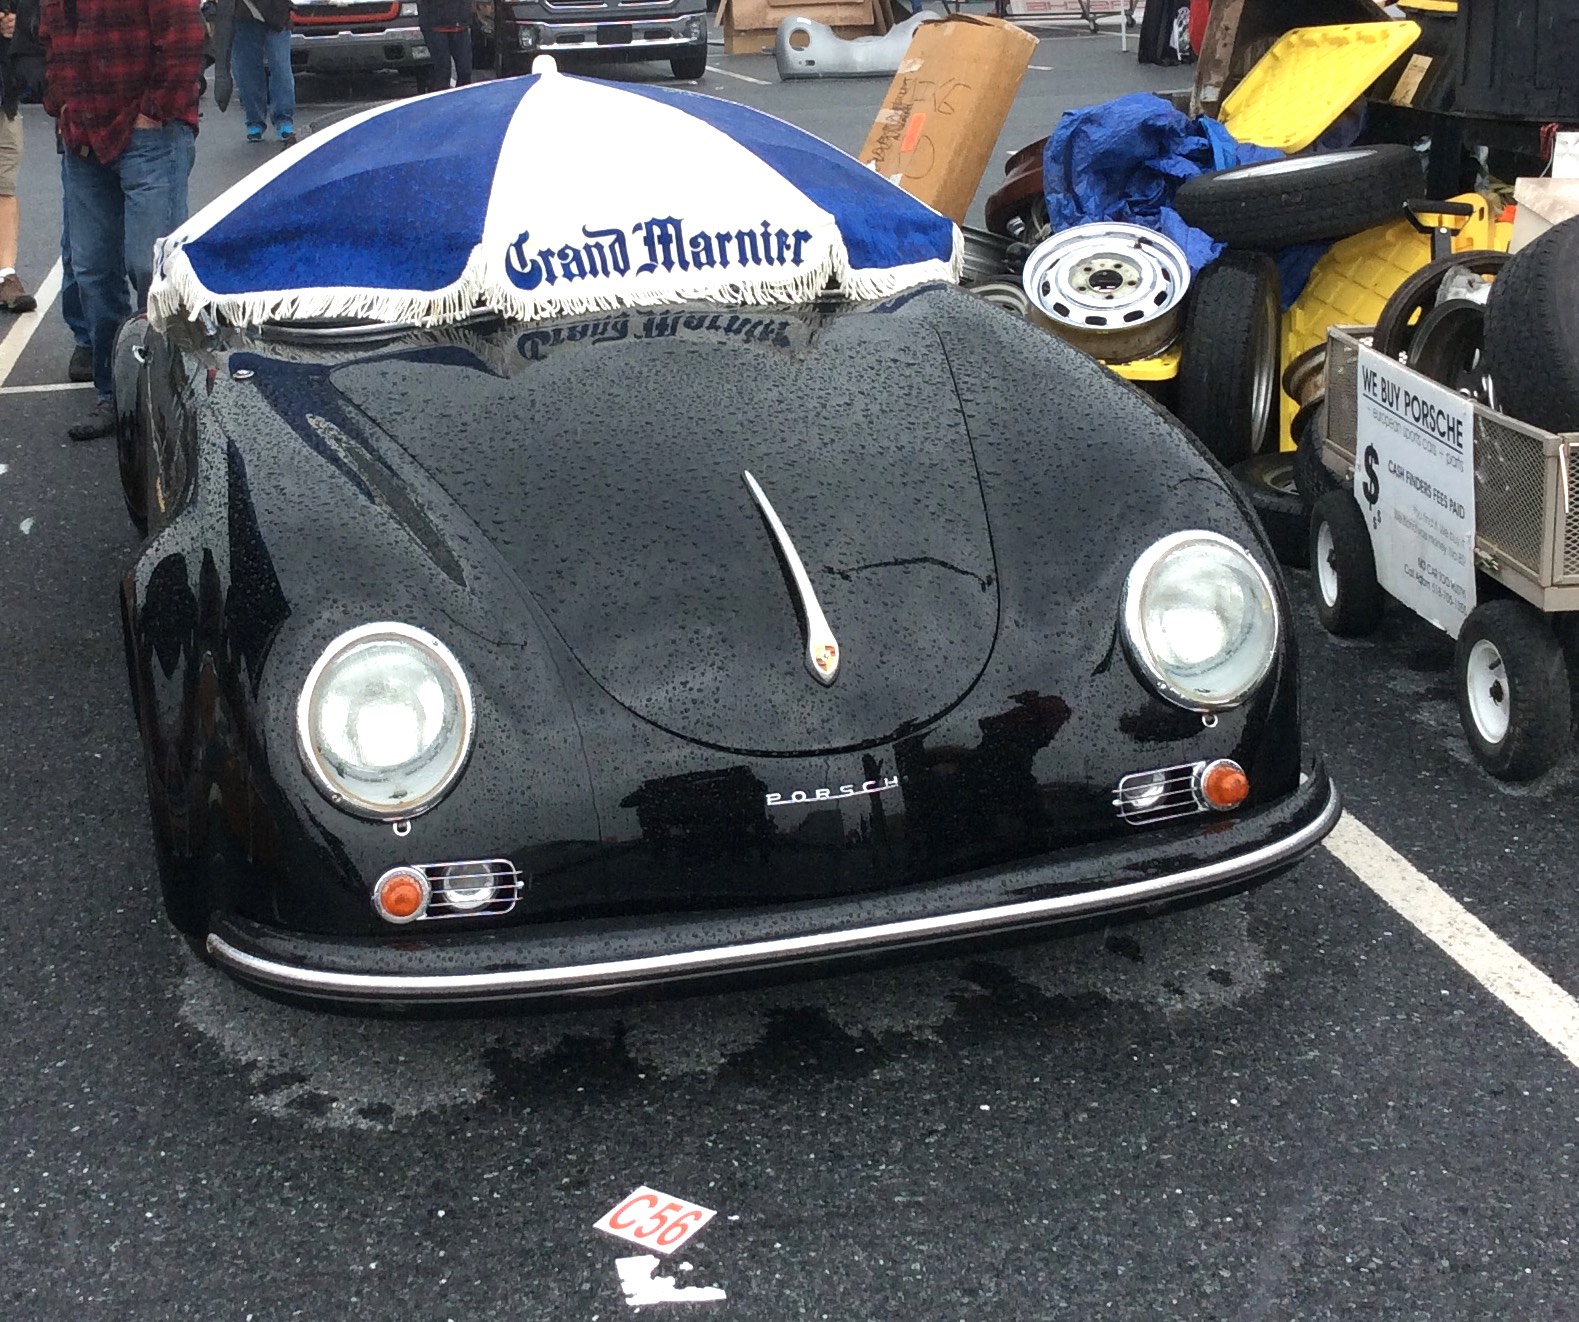 356 speedster protected from the rain